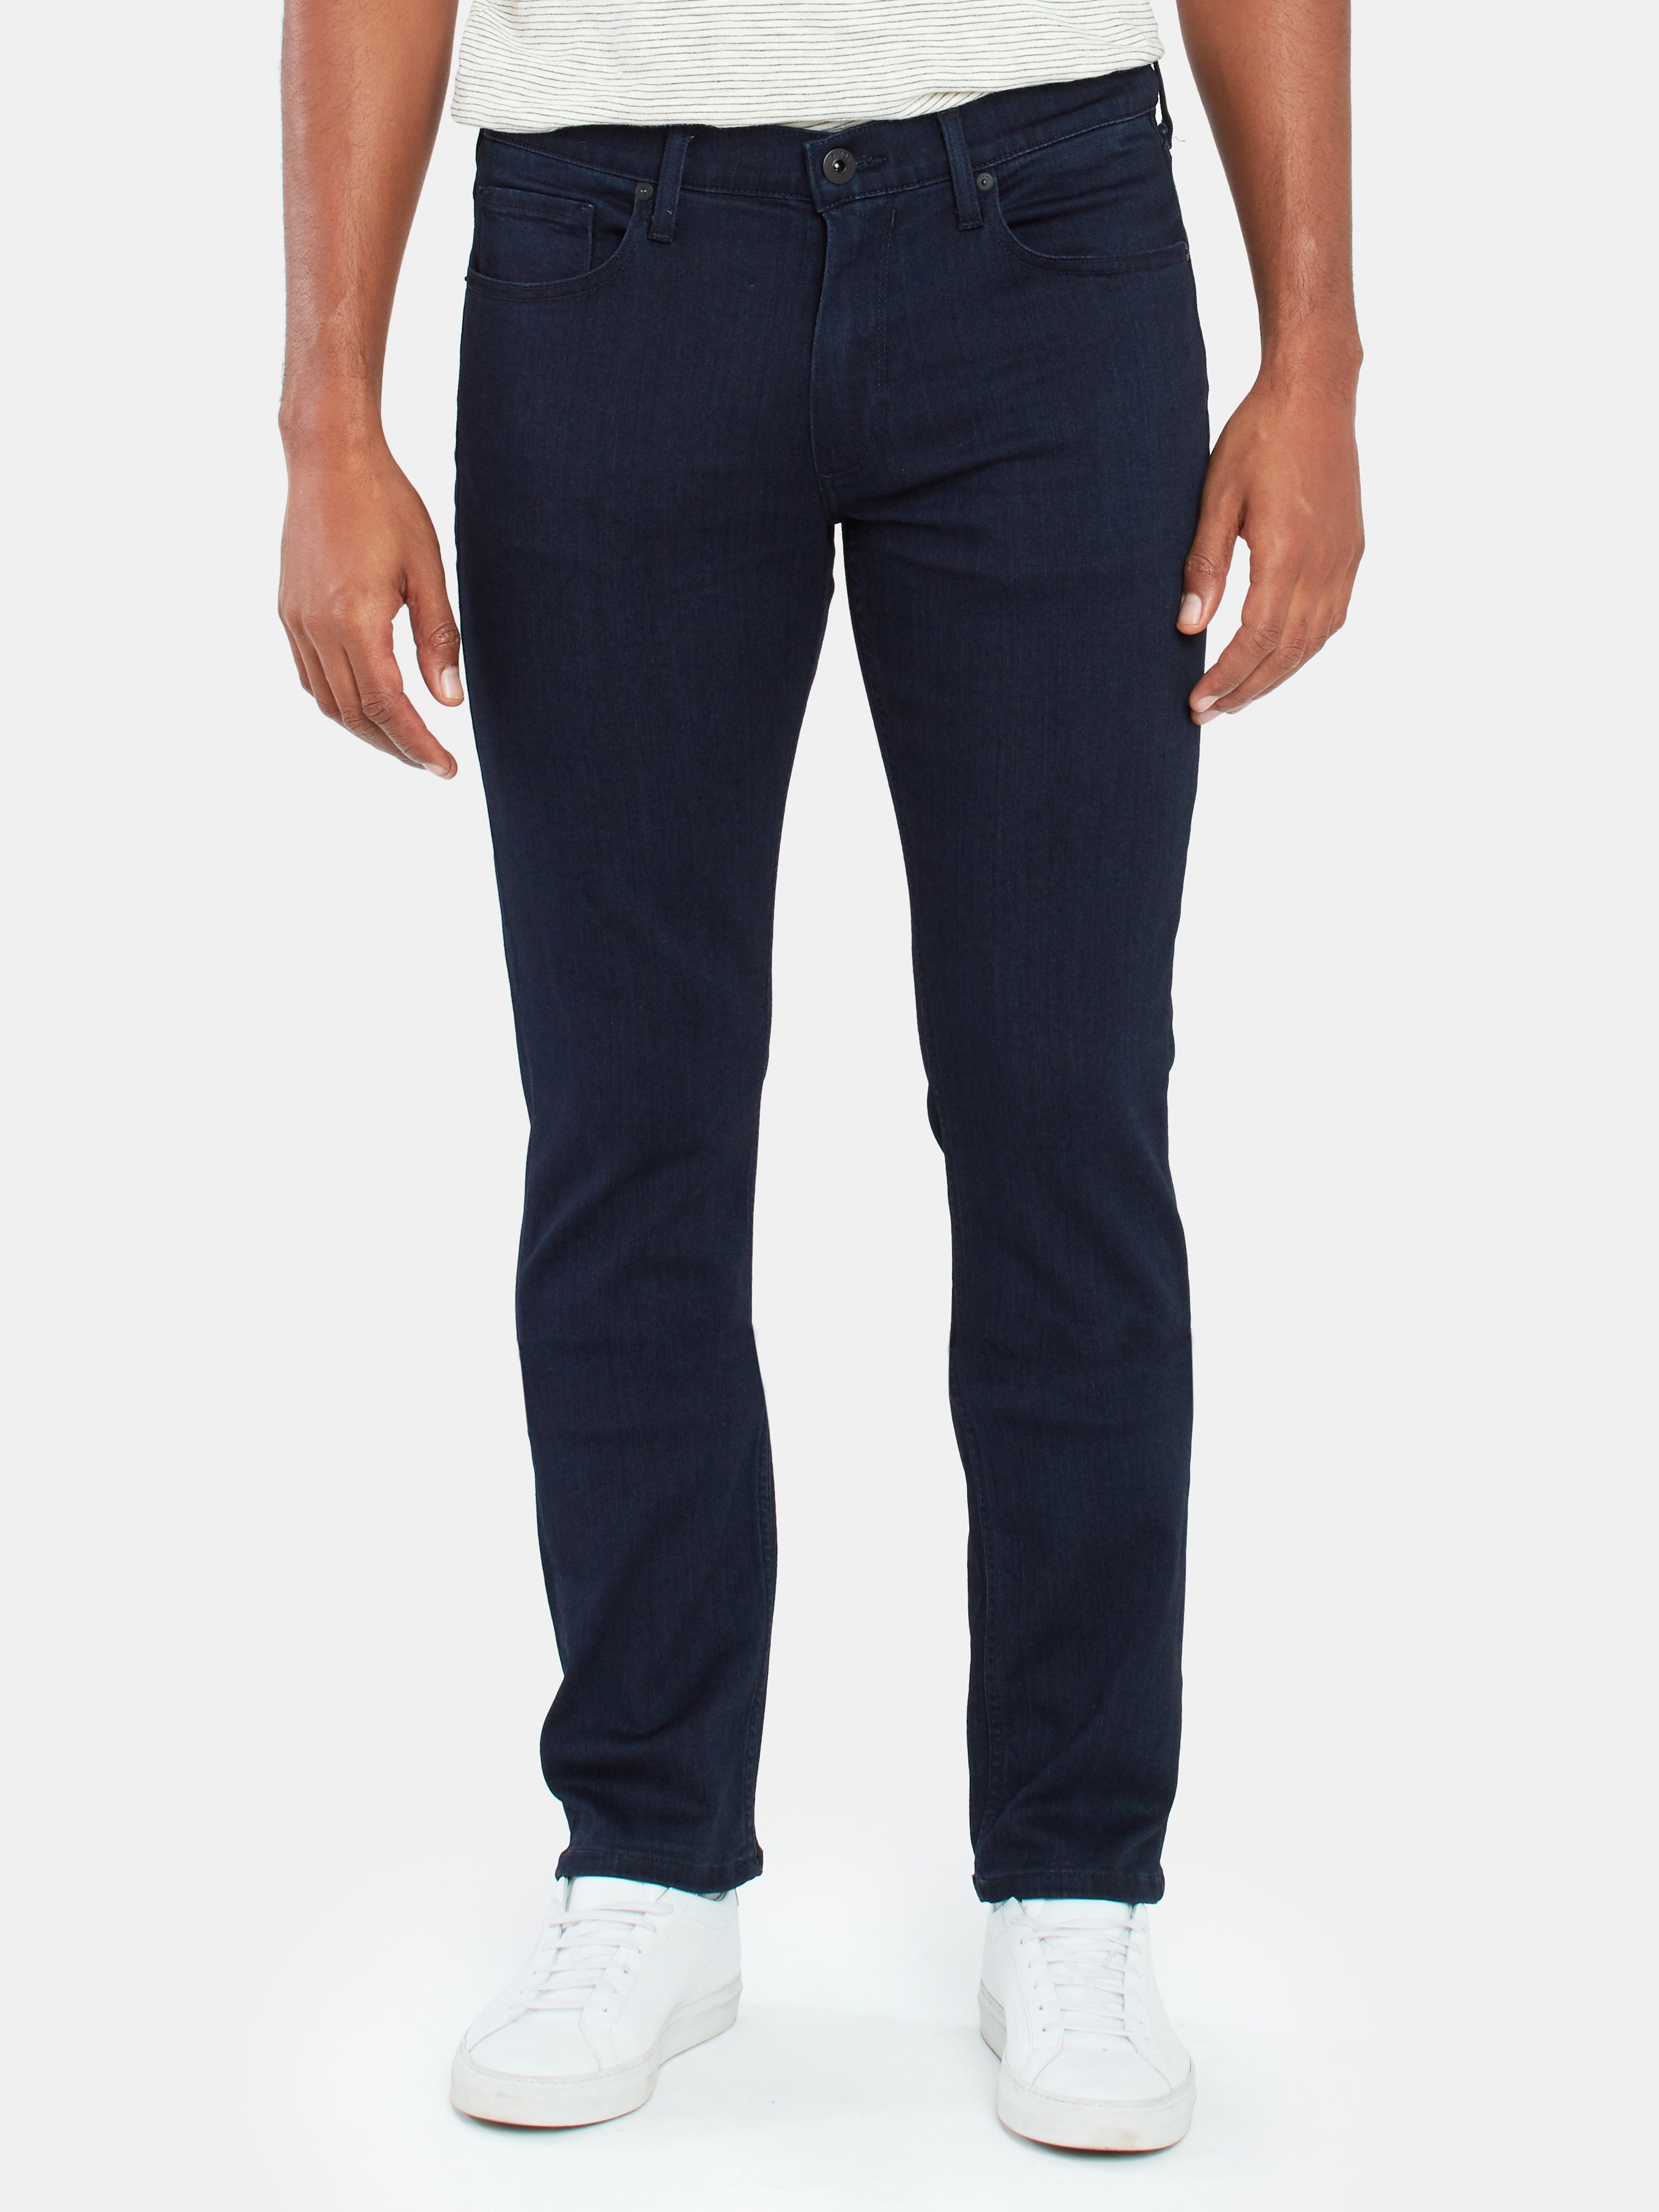 Paige Federal Slim Straight Jeans In Inkwell